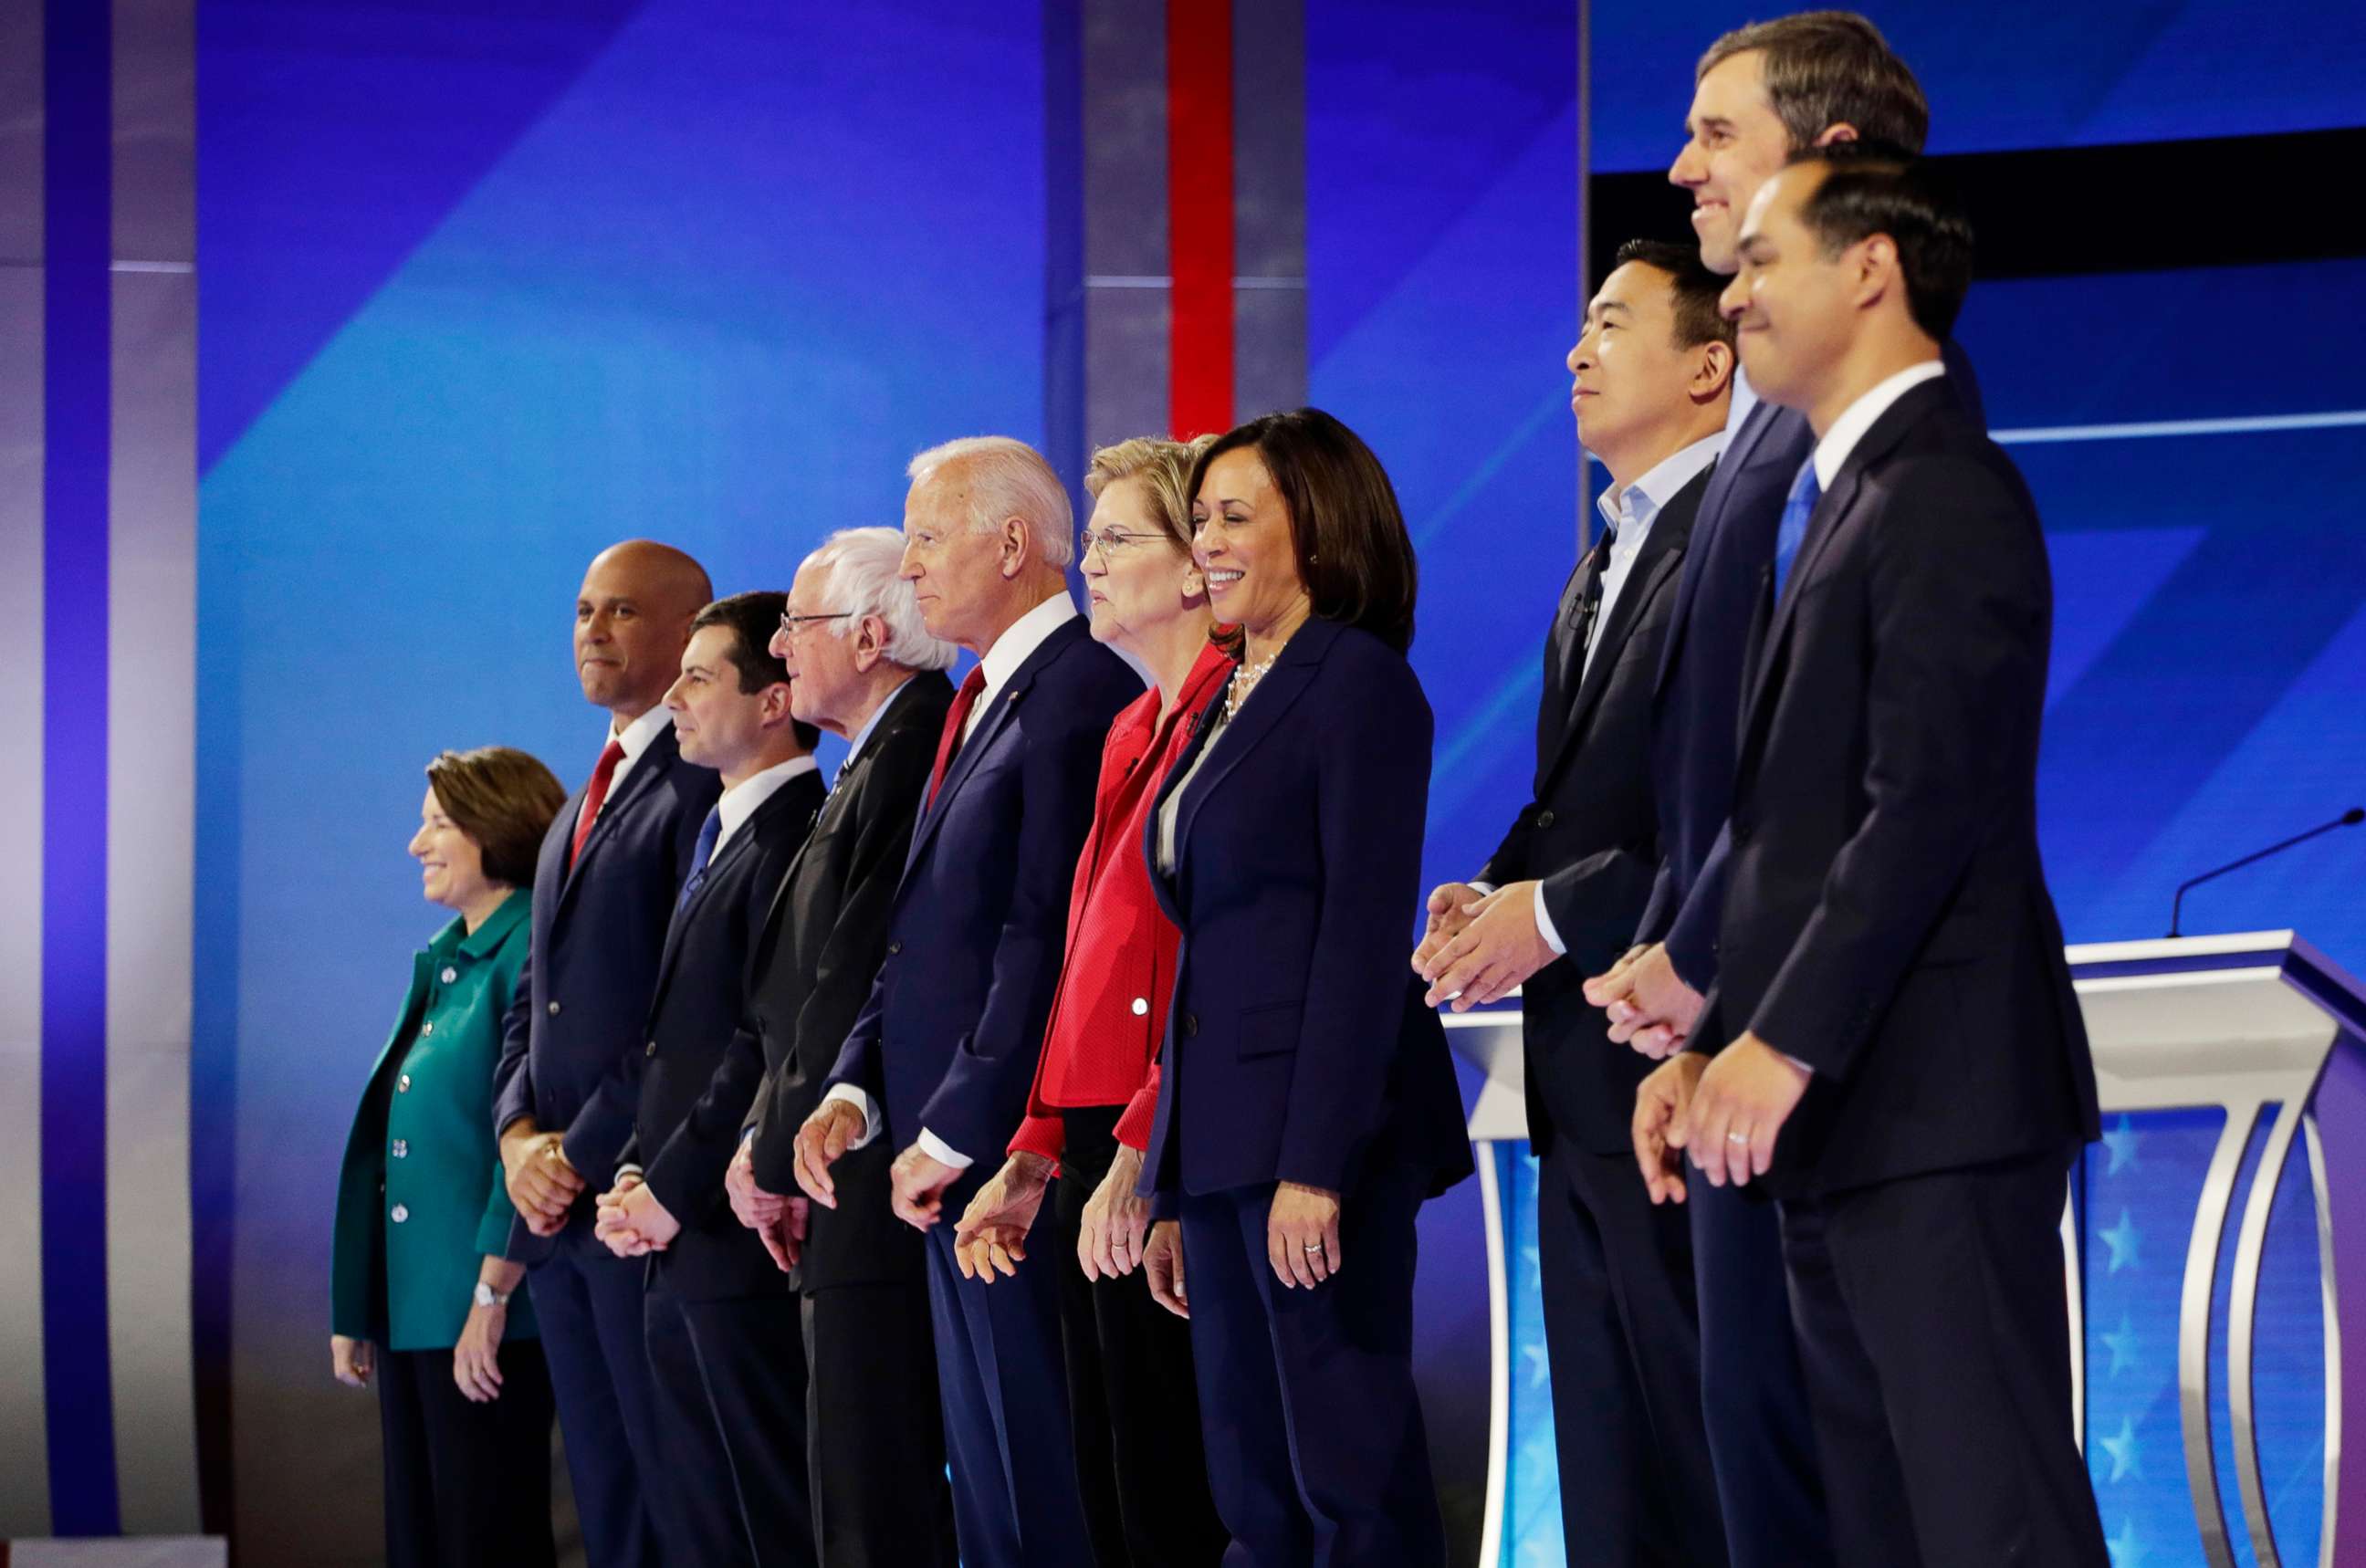 PHOTO: Democratic presidential candidates are introduced for the Democratic presidential primary debate hosted by ABC on the campus of Texas Southern University Thursday, Sept. 12, 2019, in Houston.